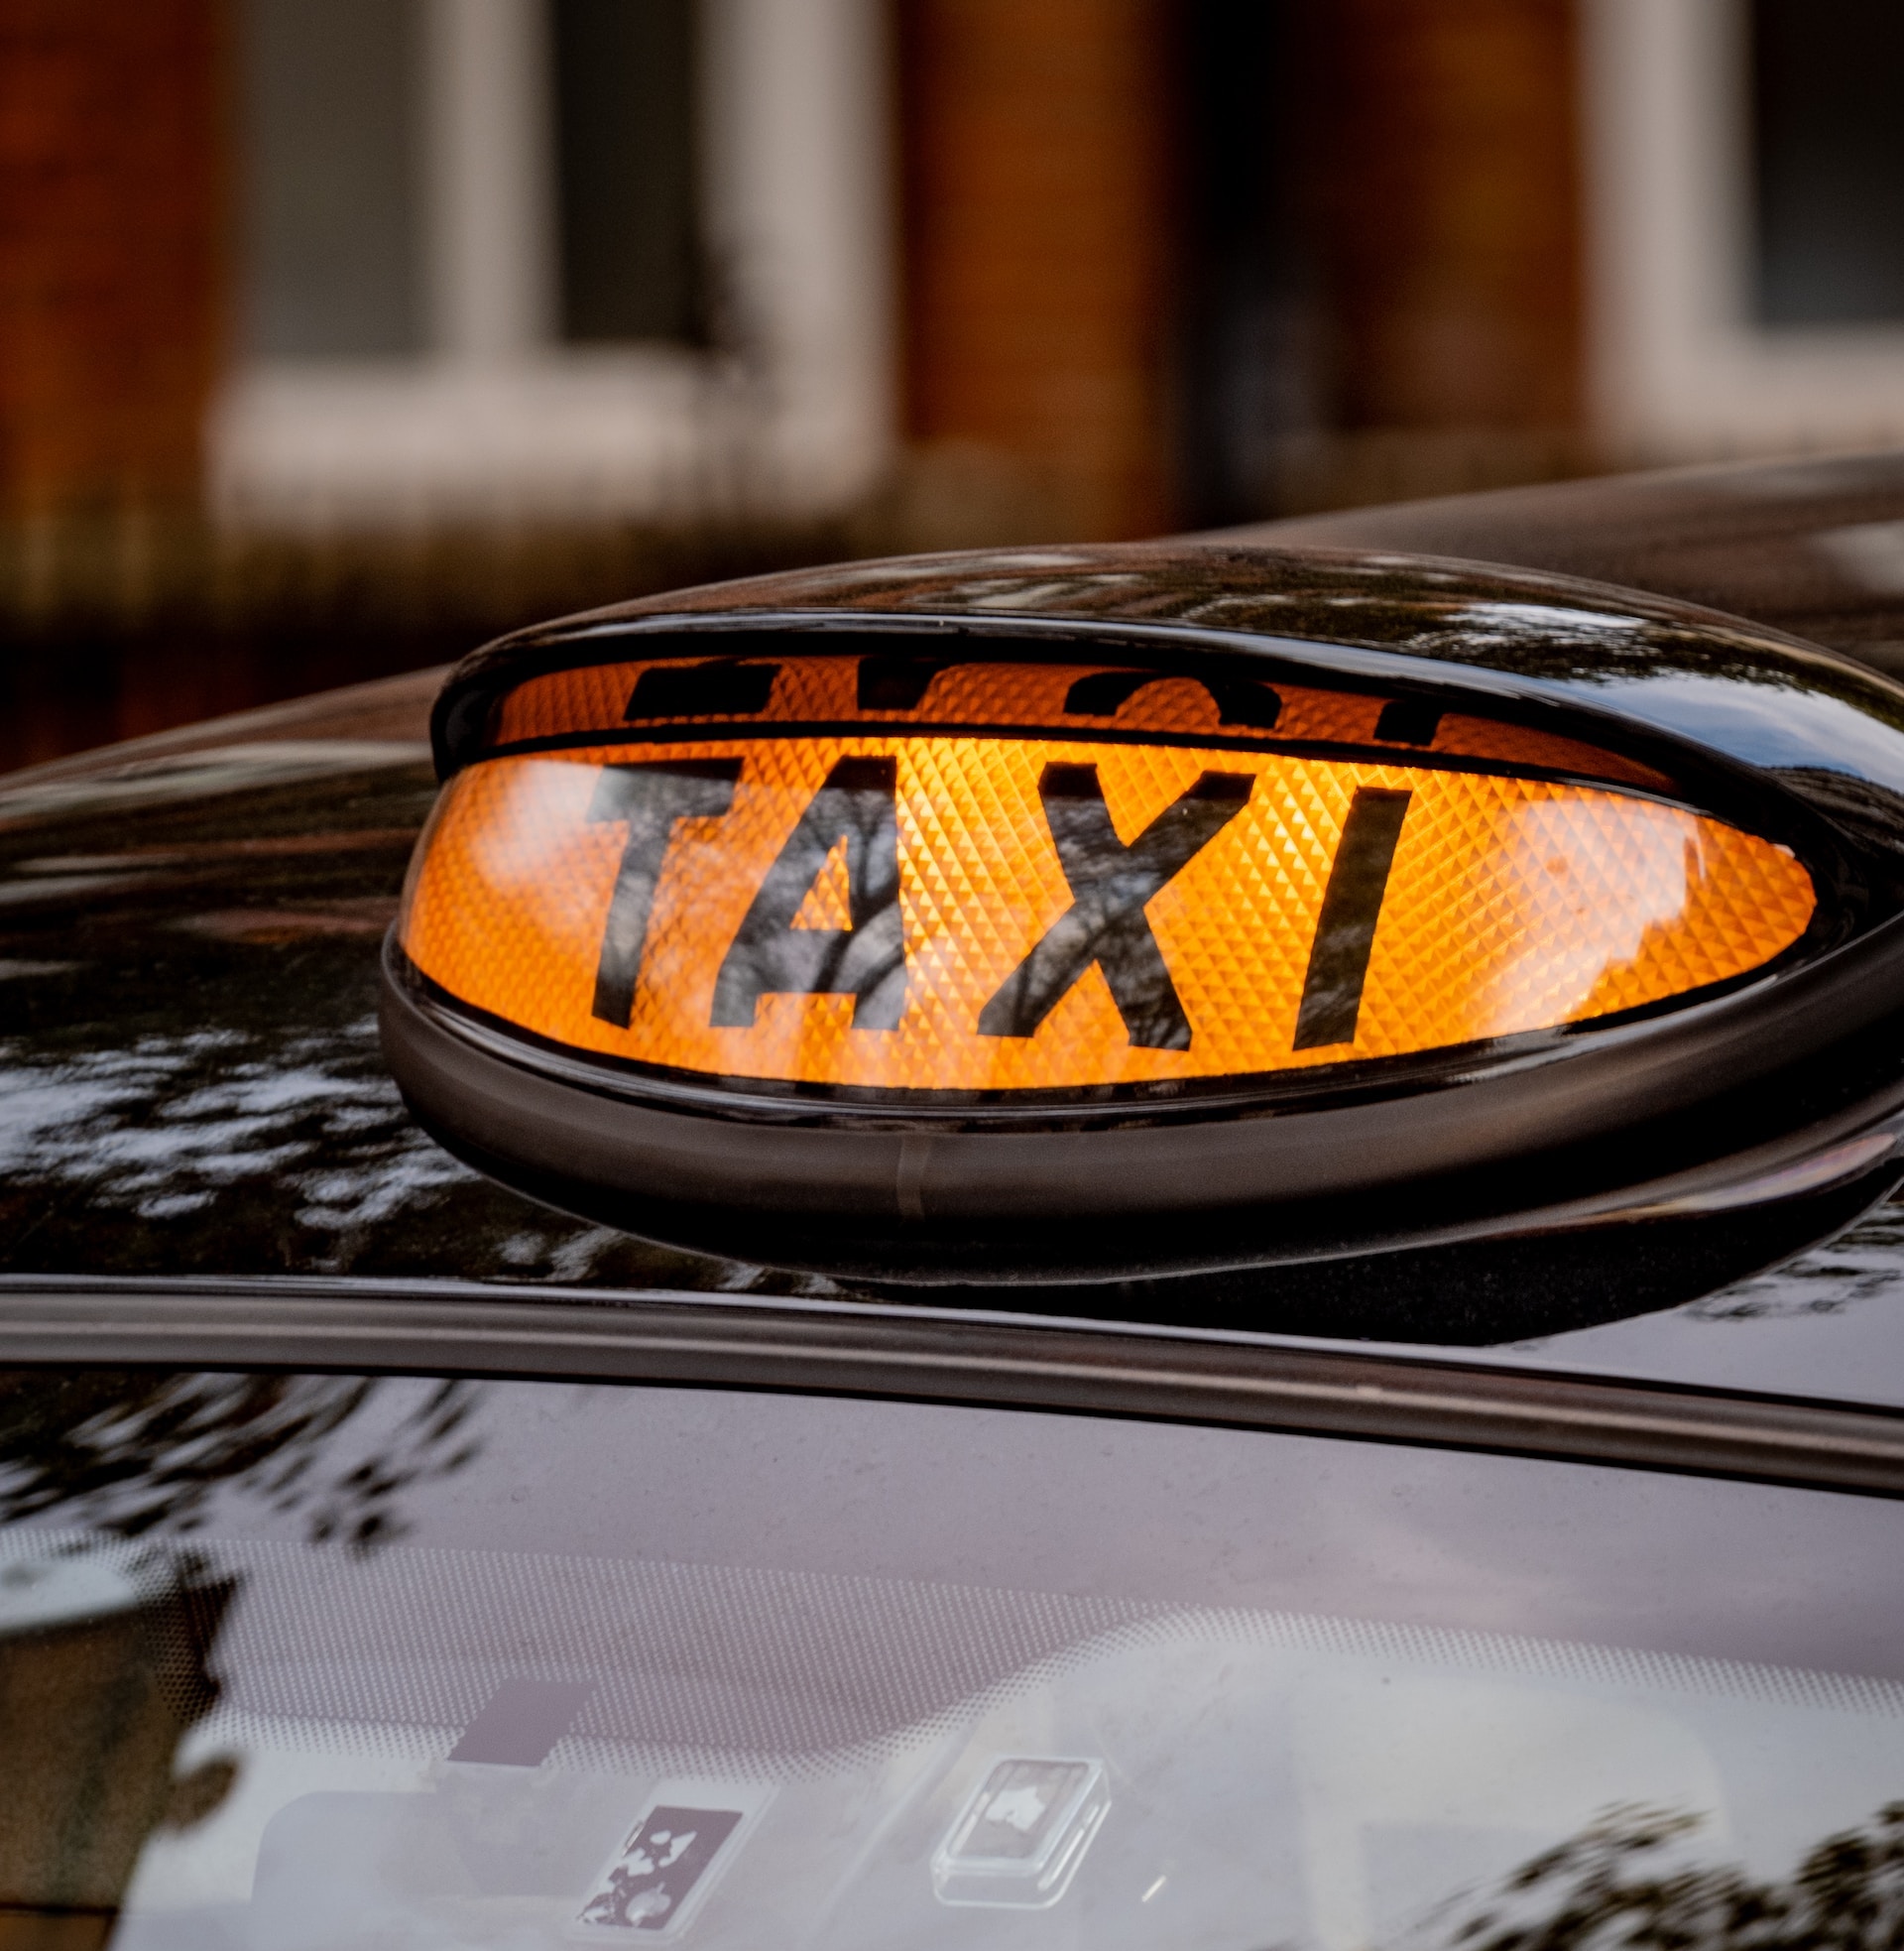 New tax checks come into effect for Scottish taxi and private hire drivers